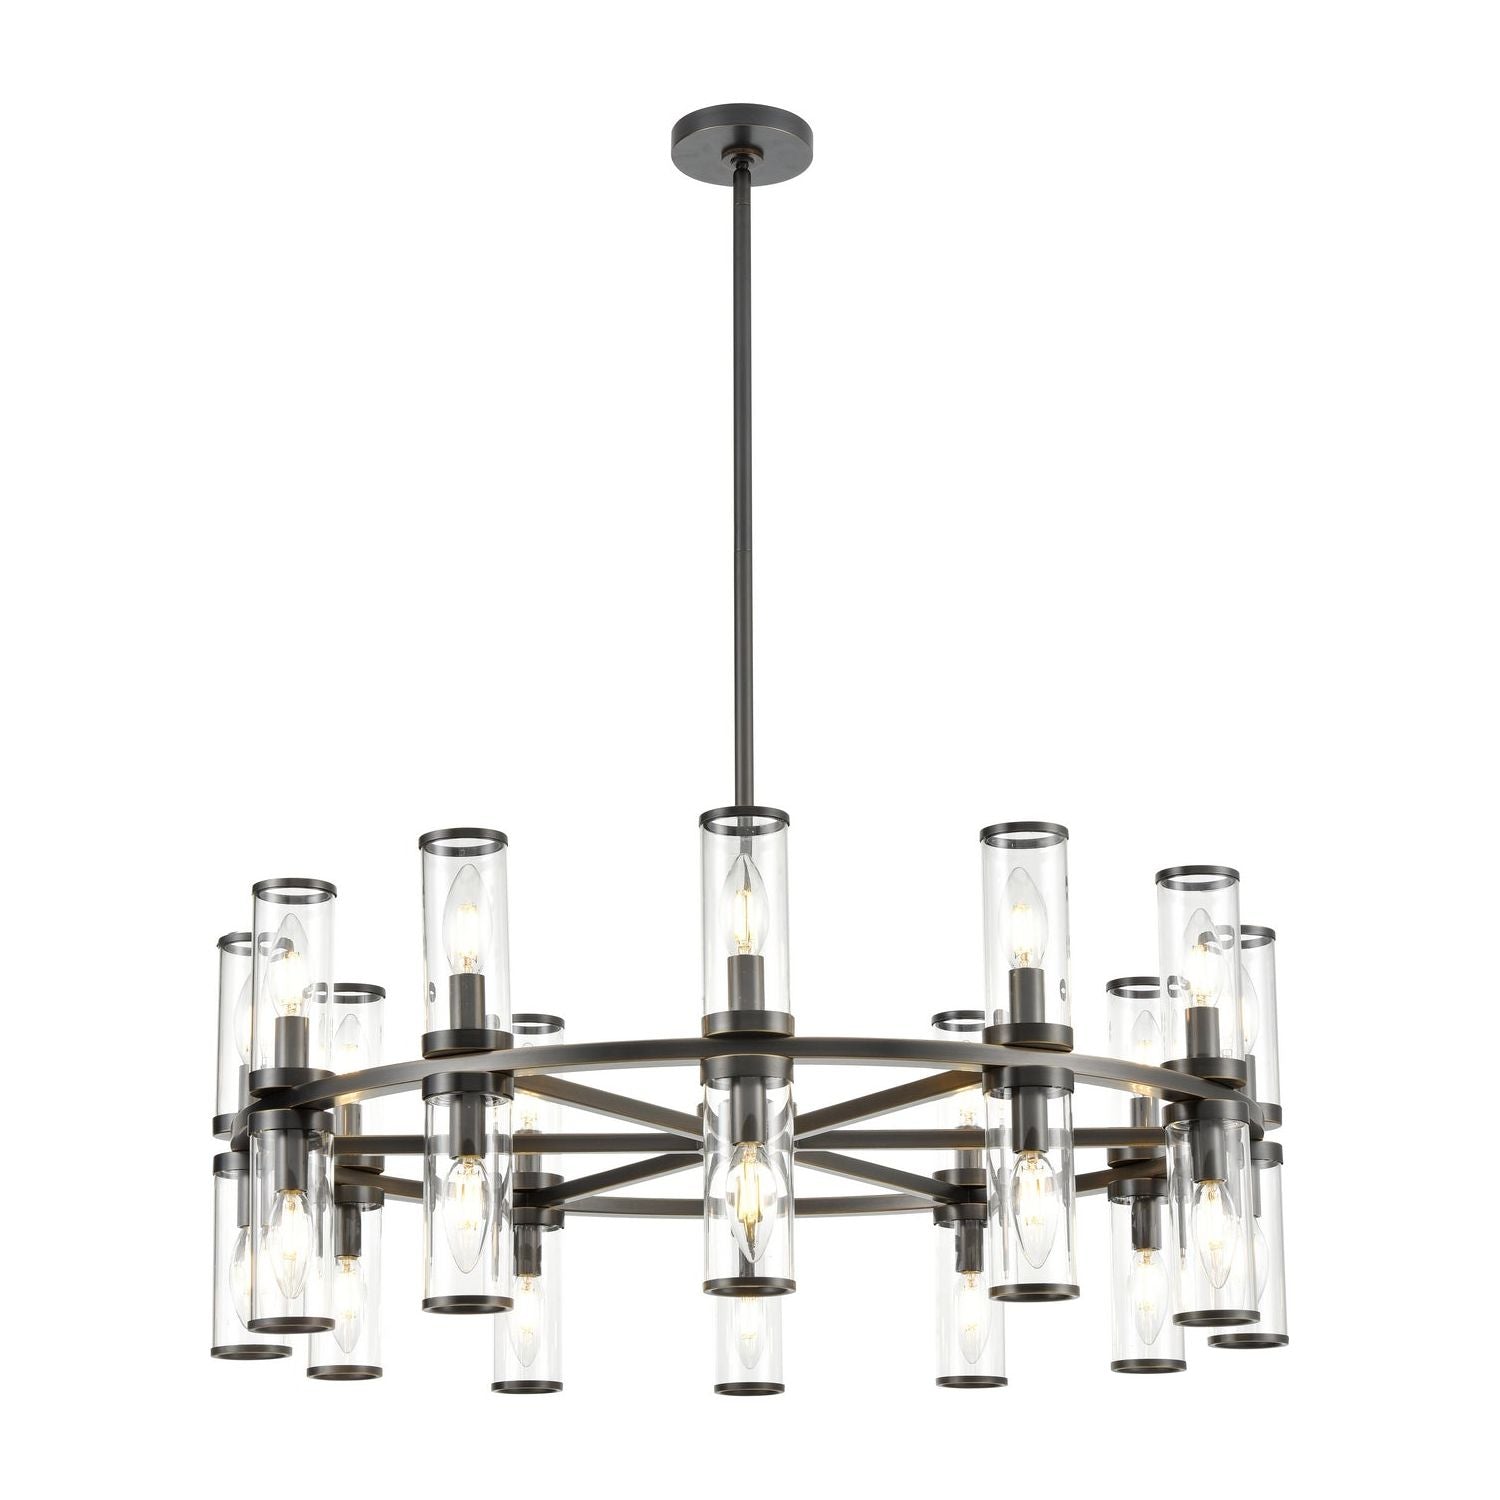 Alora Lighting - CH309024UBCG - 24 Light Chandelier - Revolve - Clear Glass/Natural Brass|Clear Glass/Polished Nickel|Clear Glass/Urban Bronze